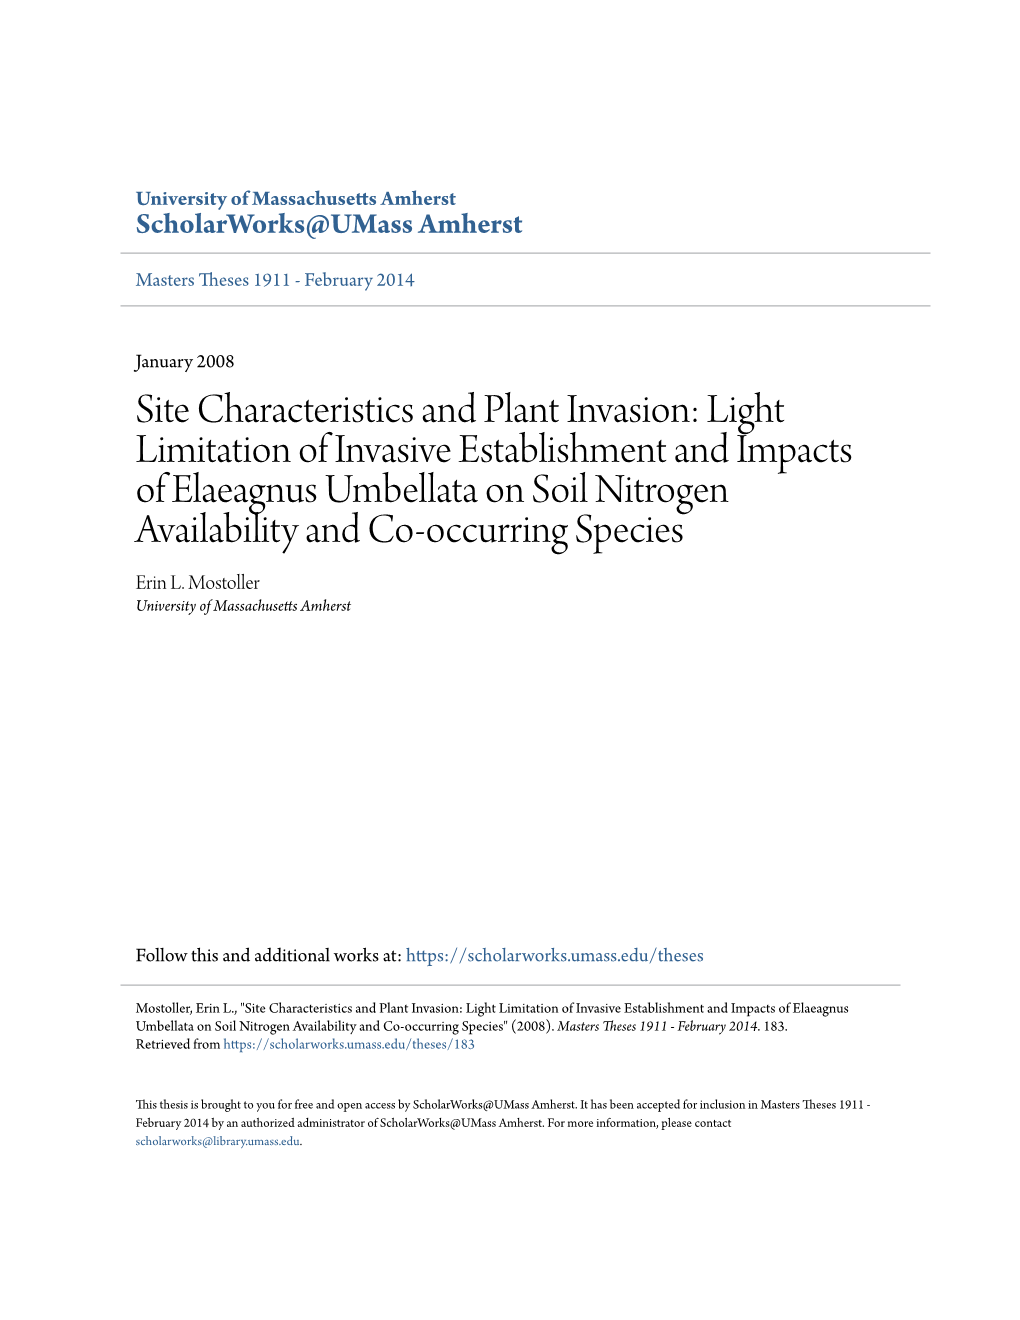 Light Limitation of Invasive Establishment and Impacts of Elaeagnus Umbellata on Soil Nitrogen Availability and Co-Occurring Species Erin L